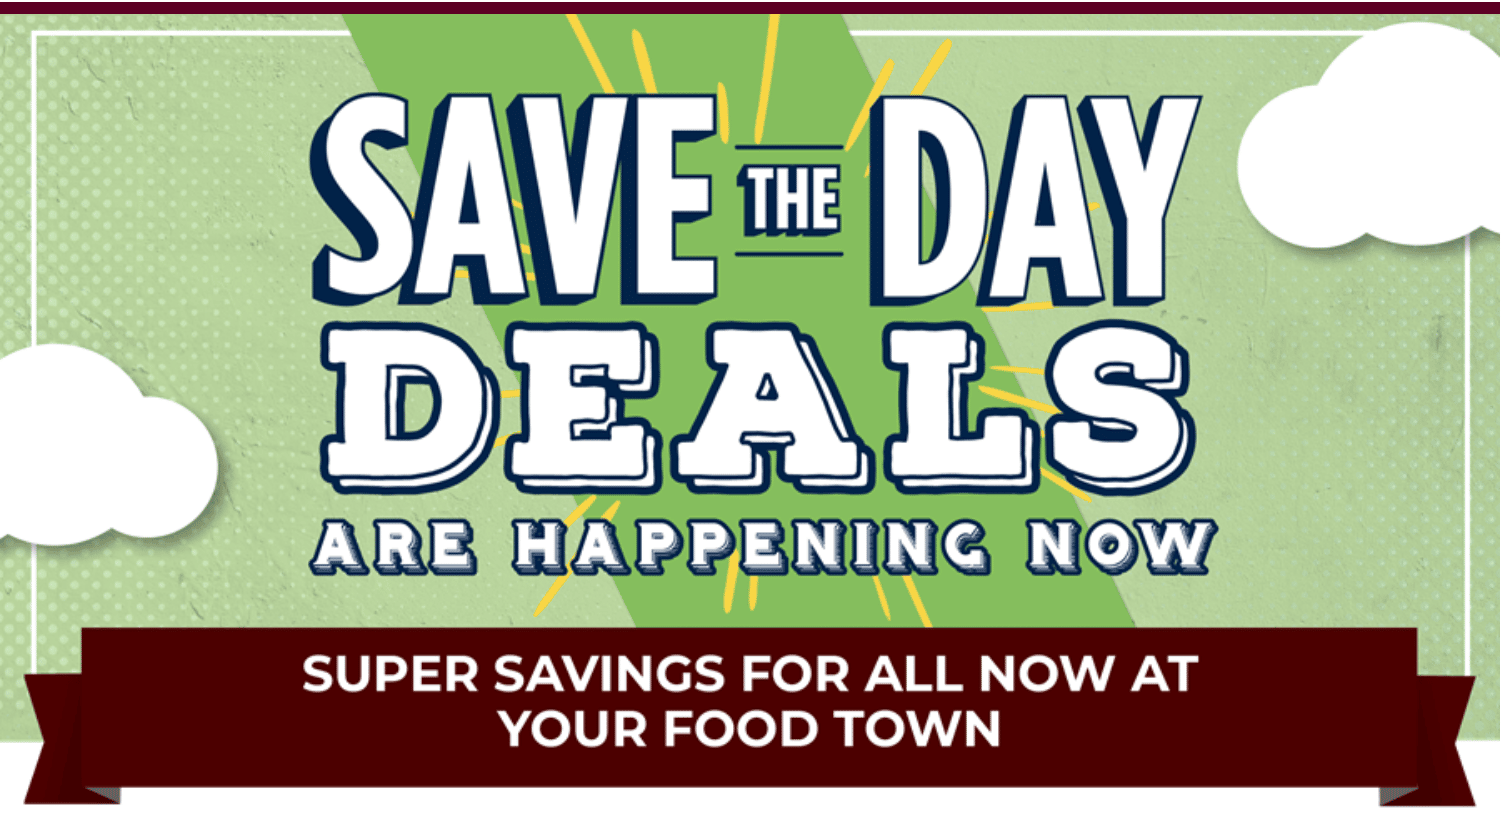 All About Our Save the Day Deals │ Food Town News